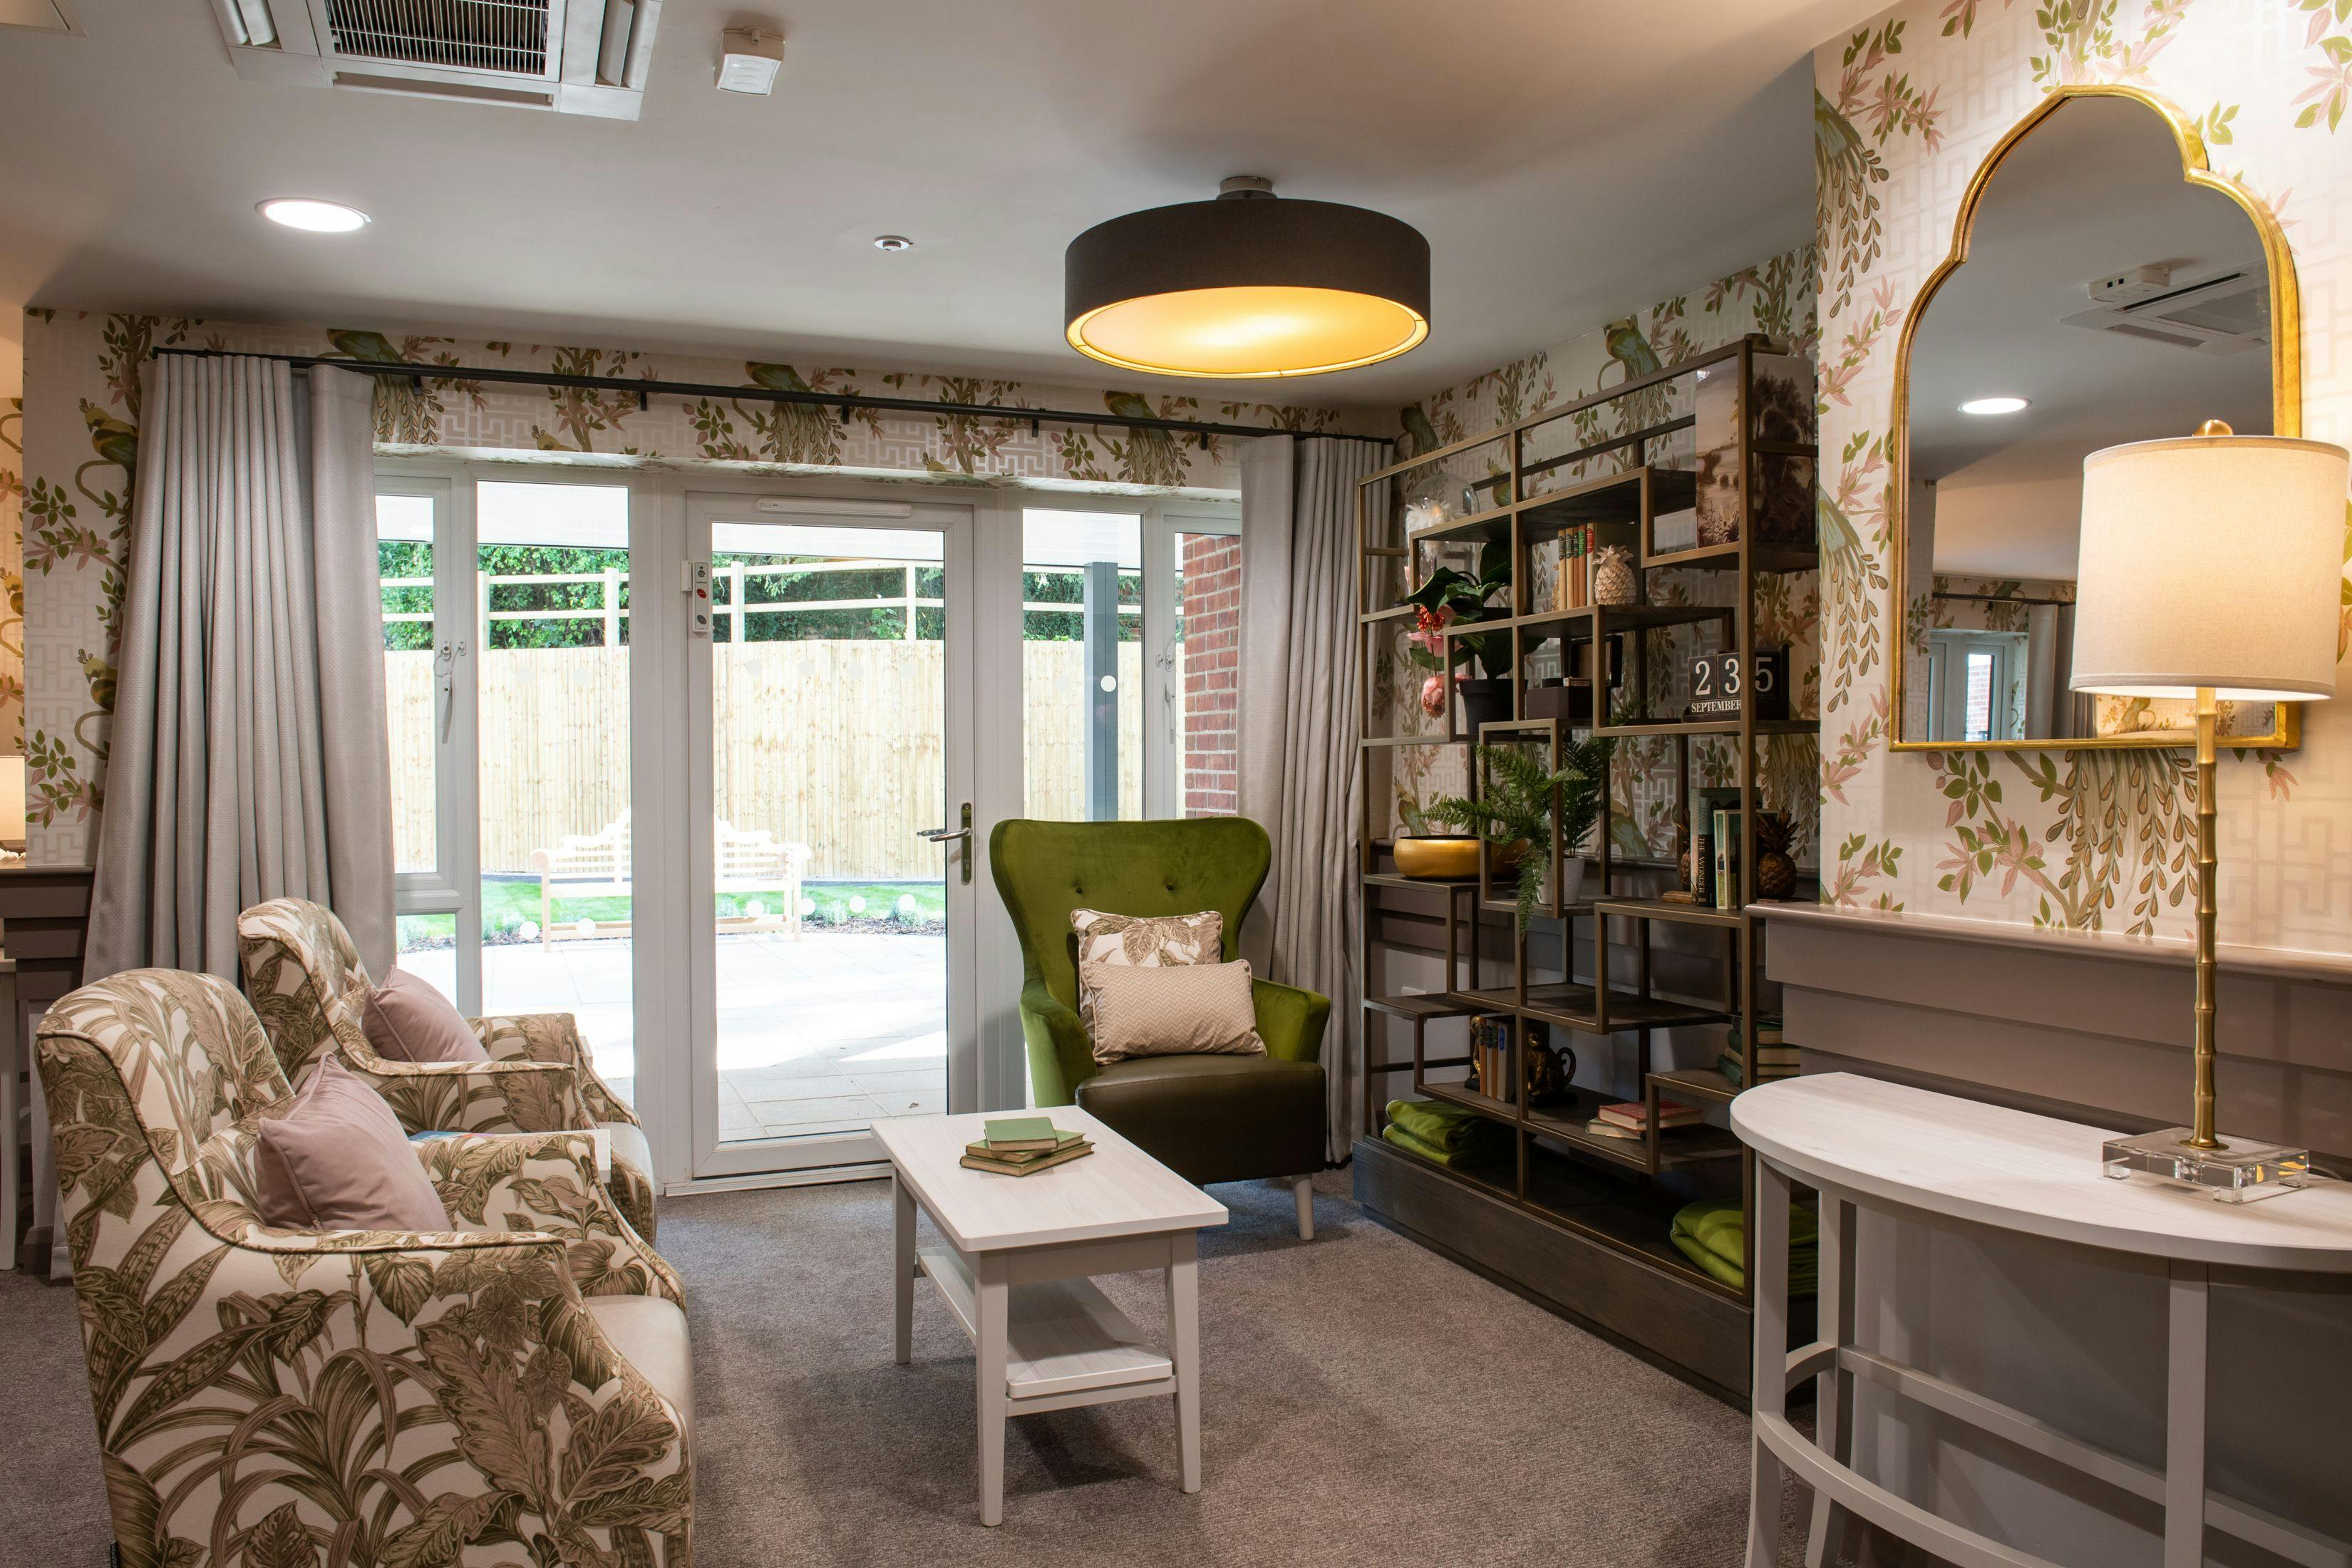 New Care - Wilmslow Manor care home 20